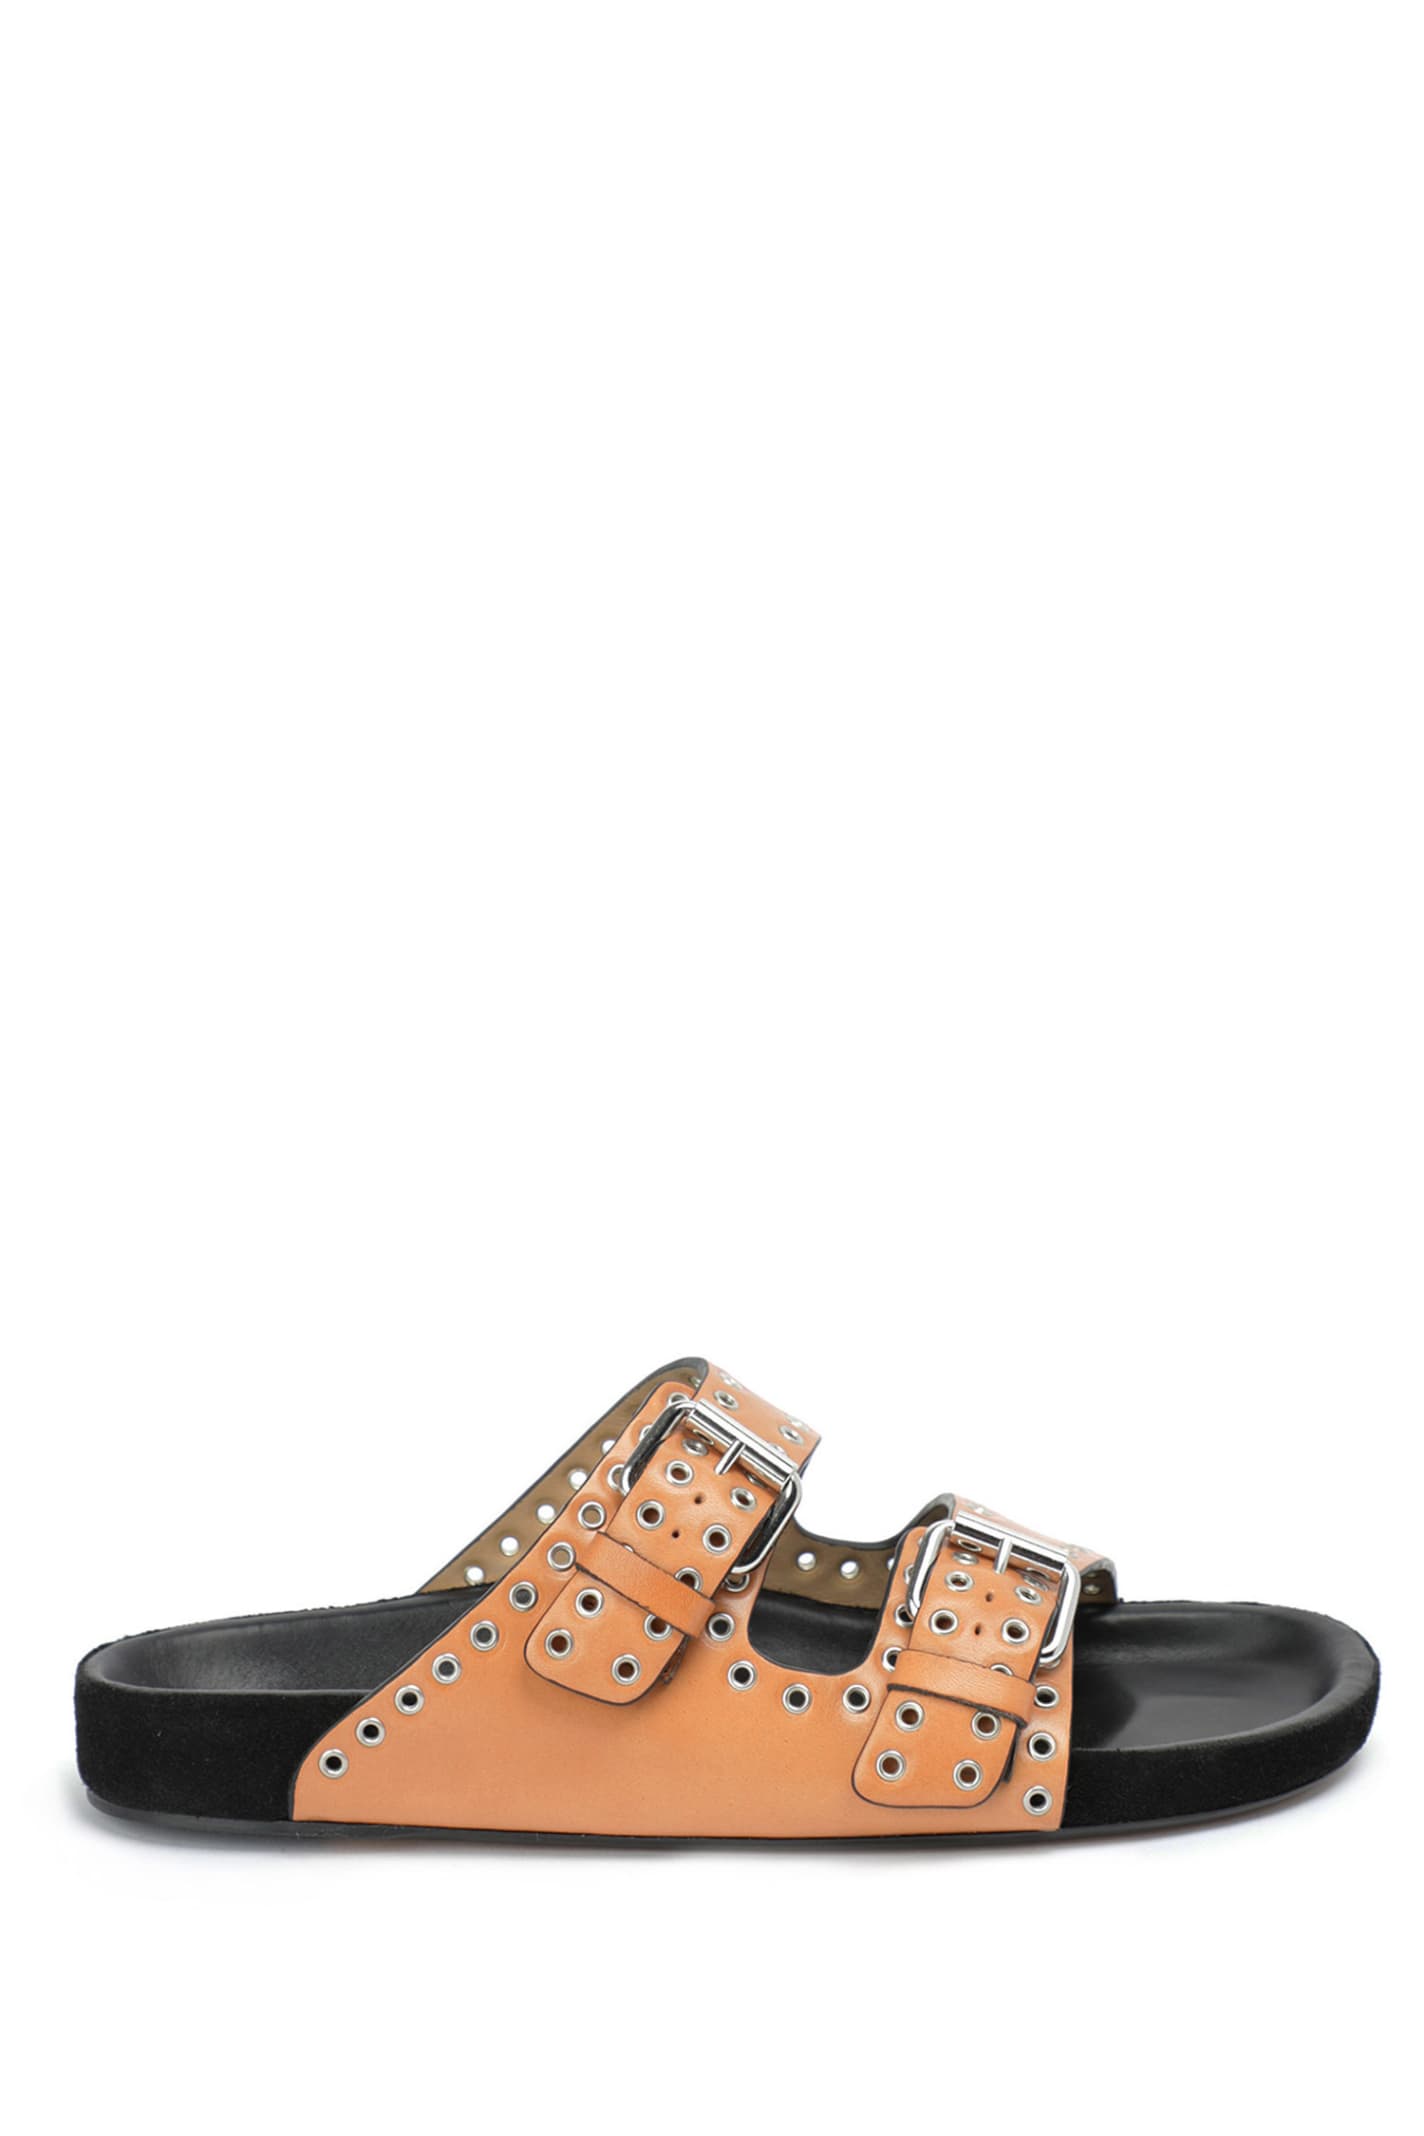 Isabel Marant Flat Sandals In Brown Leather With Stud